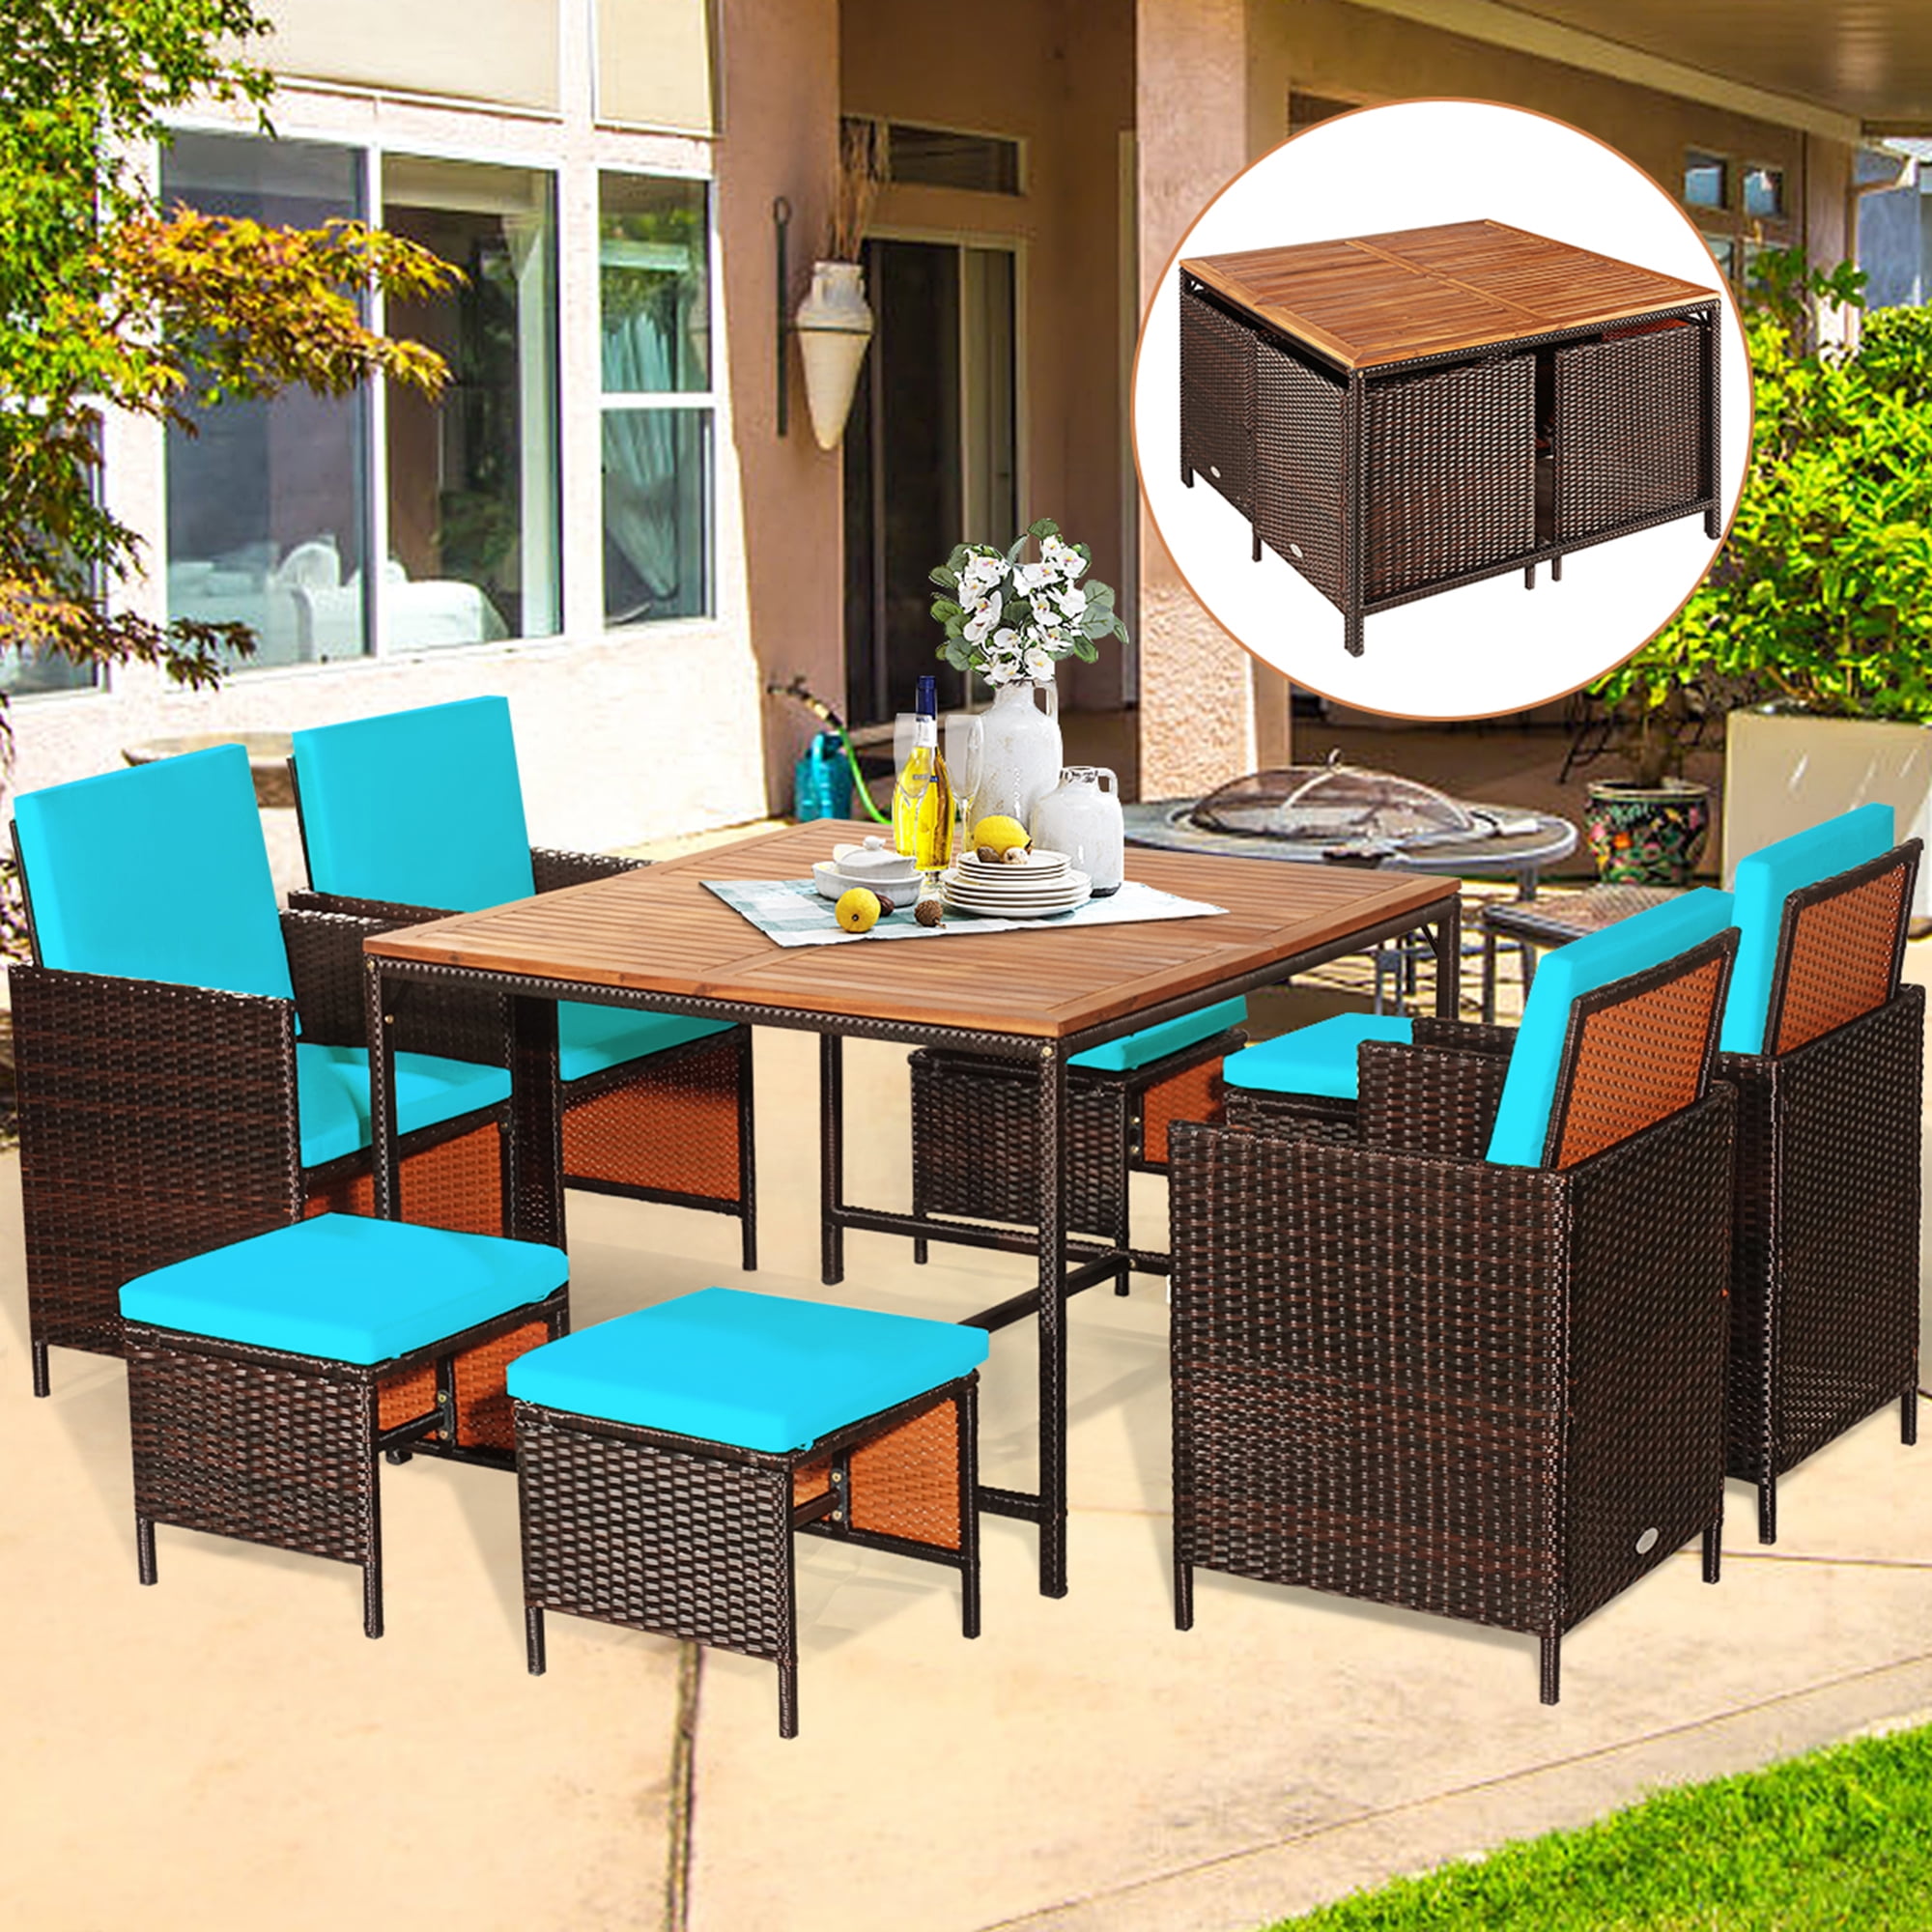 St Croix All Weather Resin Wicker Furniture Sets, Tobacco - Wicker Patio  Furniture, Full Size - Outdoor Resin Wicker Furniture